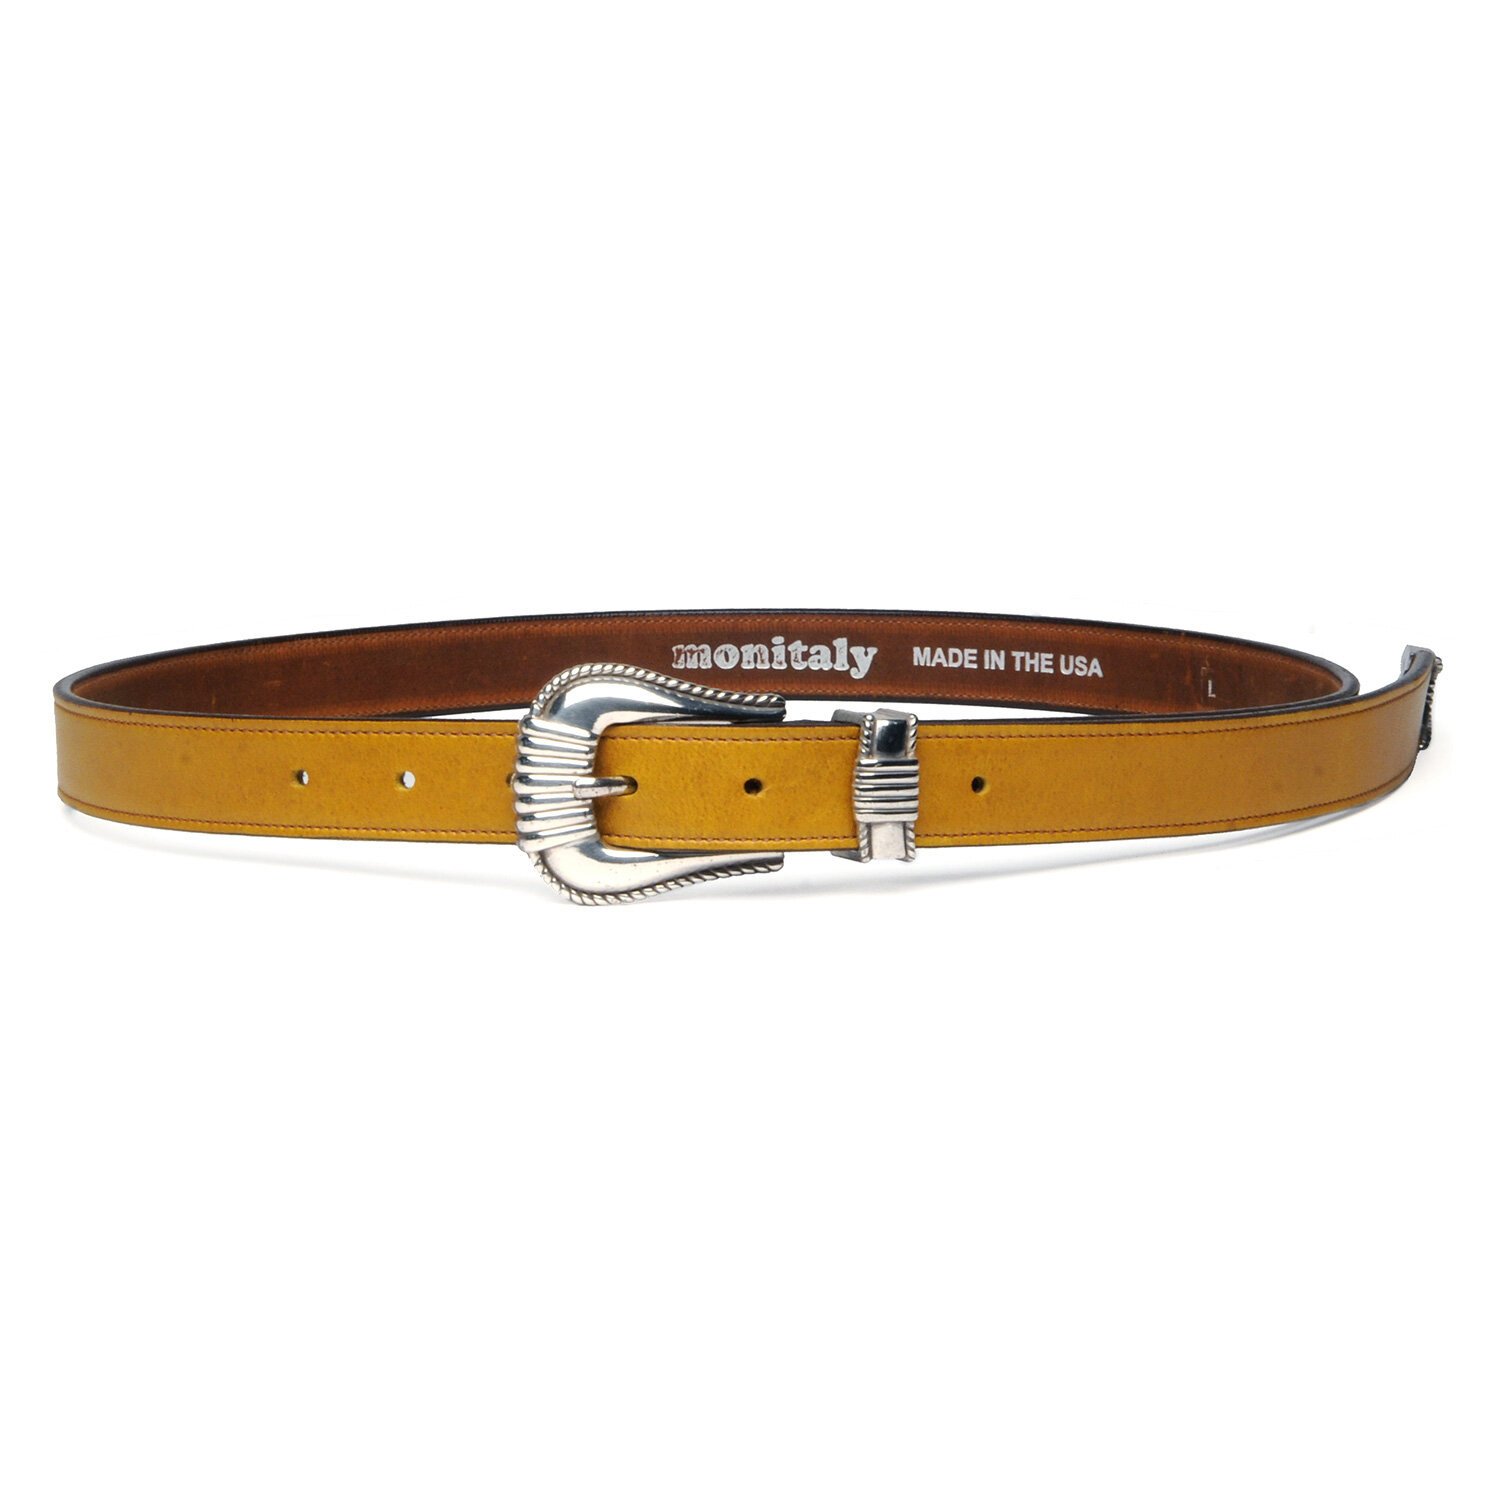 Extended 1" Stitched Belt w/ 3-pc Silver Buckle Set